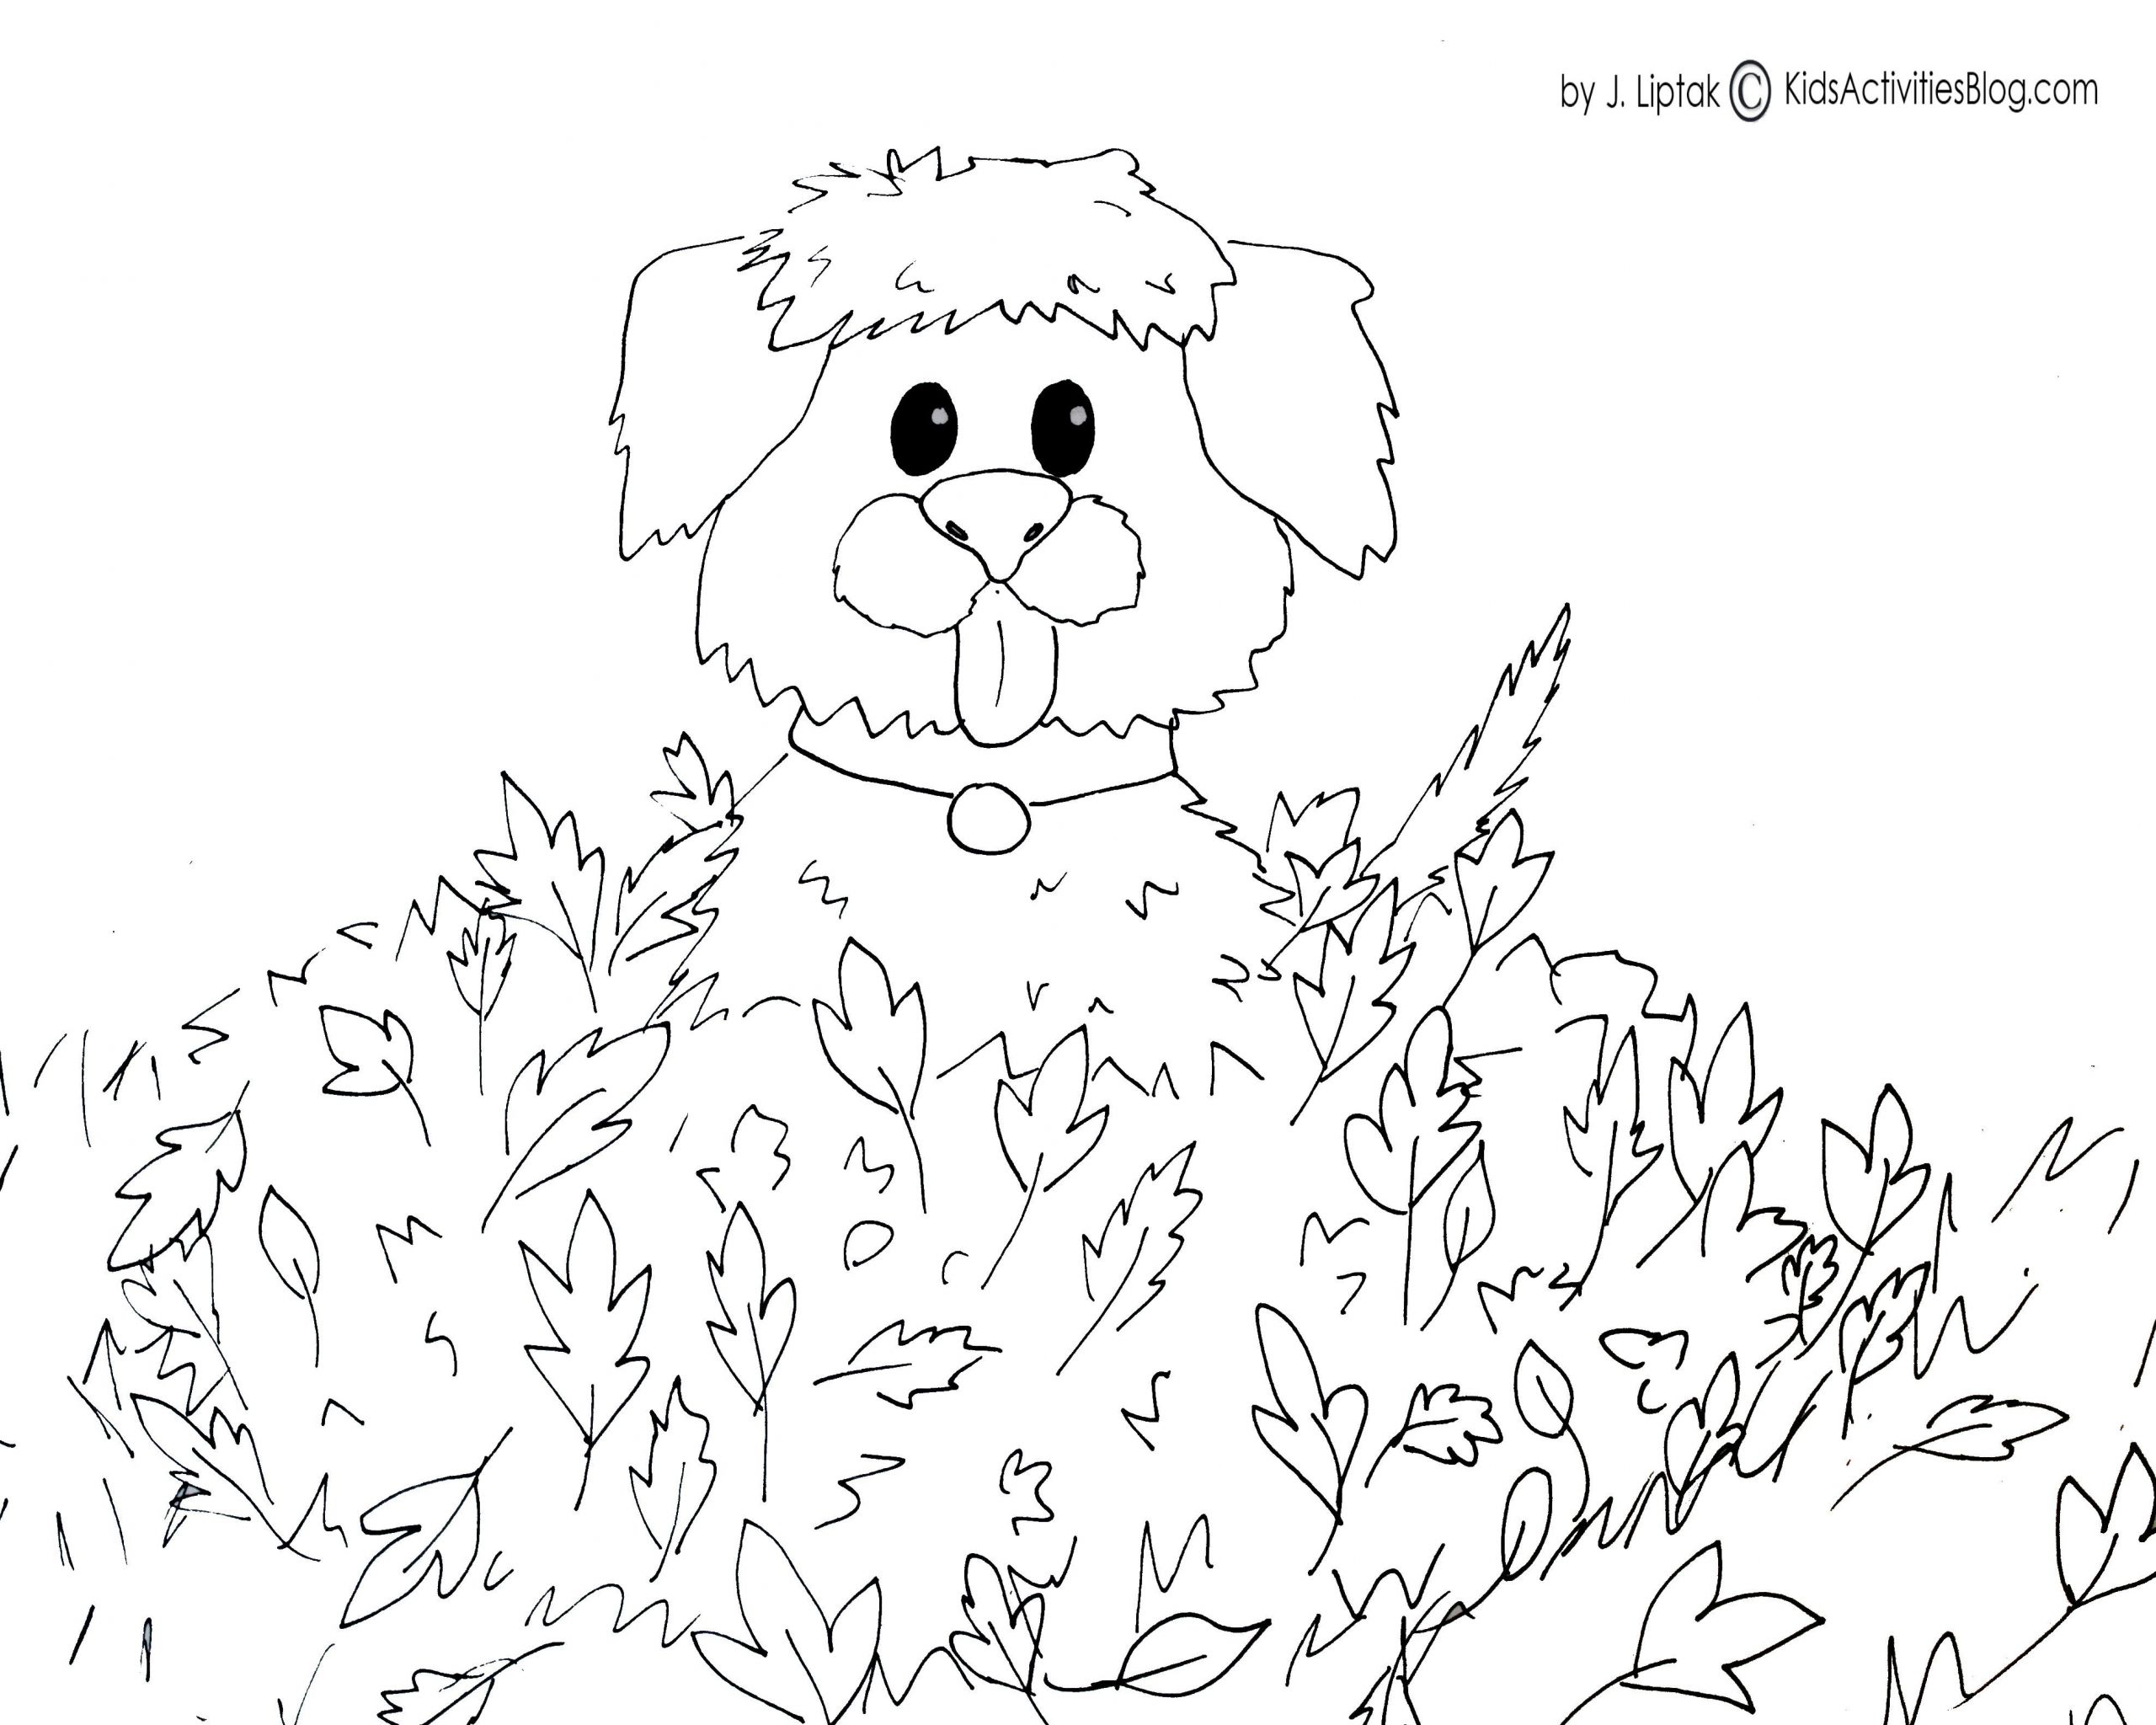 Fall Coloring Pages For Toddlers
 4 FREE PRINTABLE FALL COLORING PAGES Kids Activities